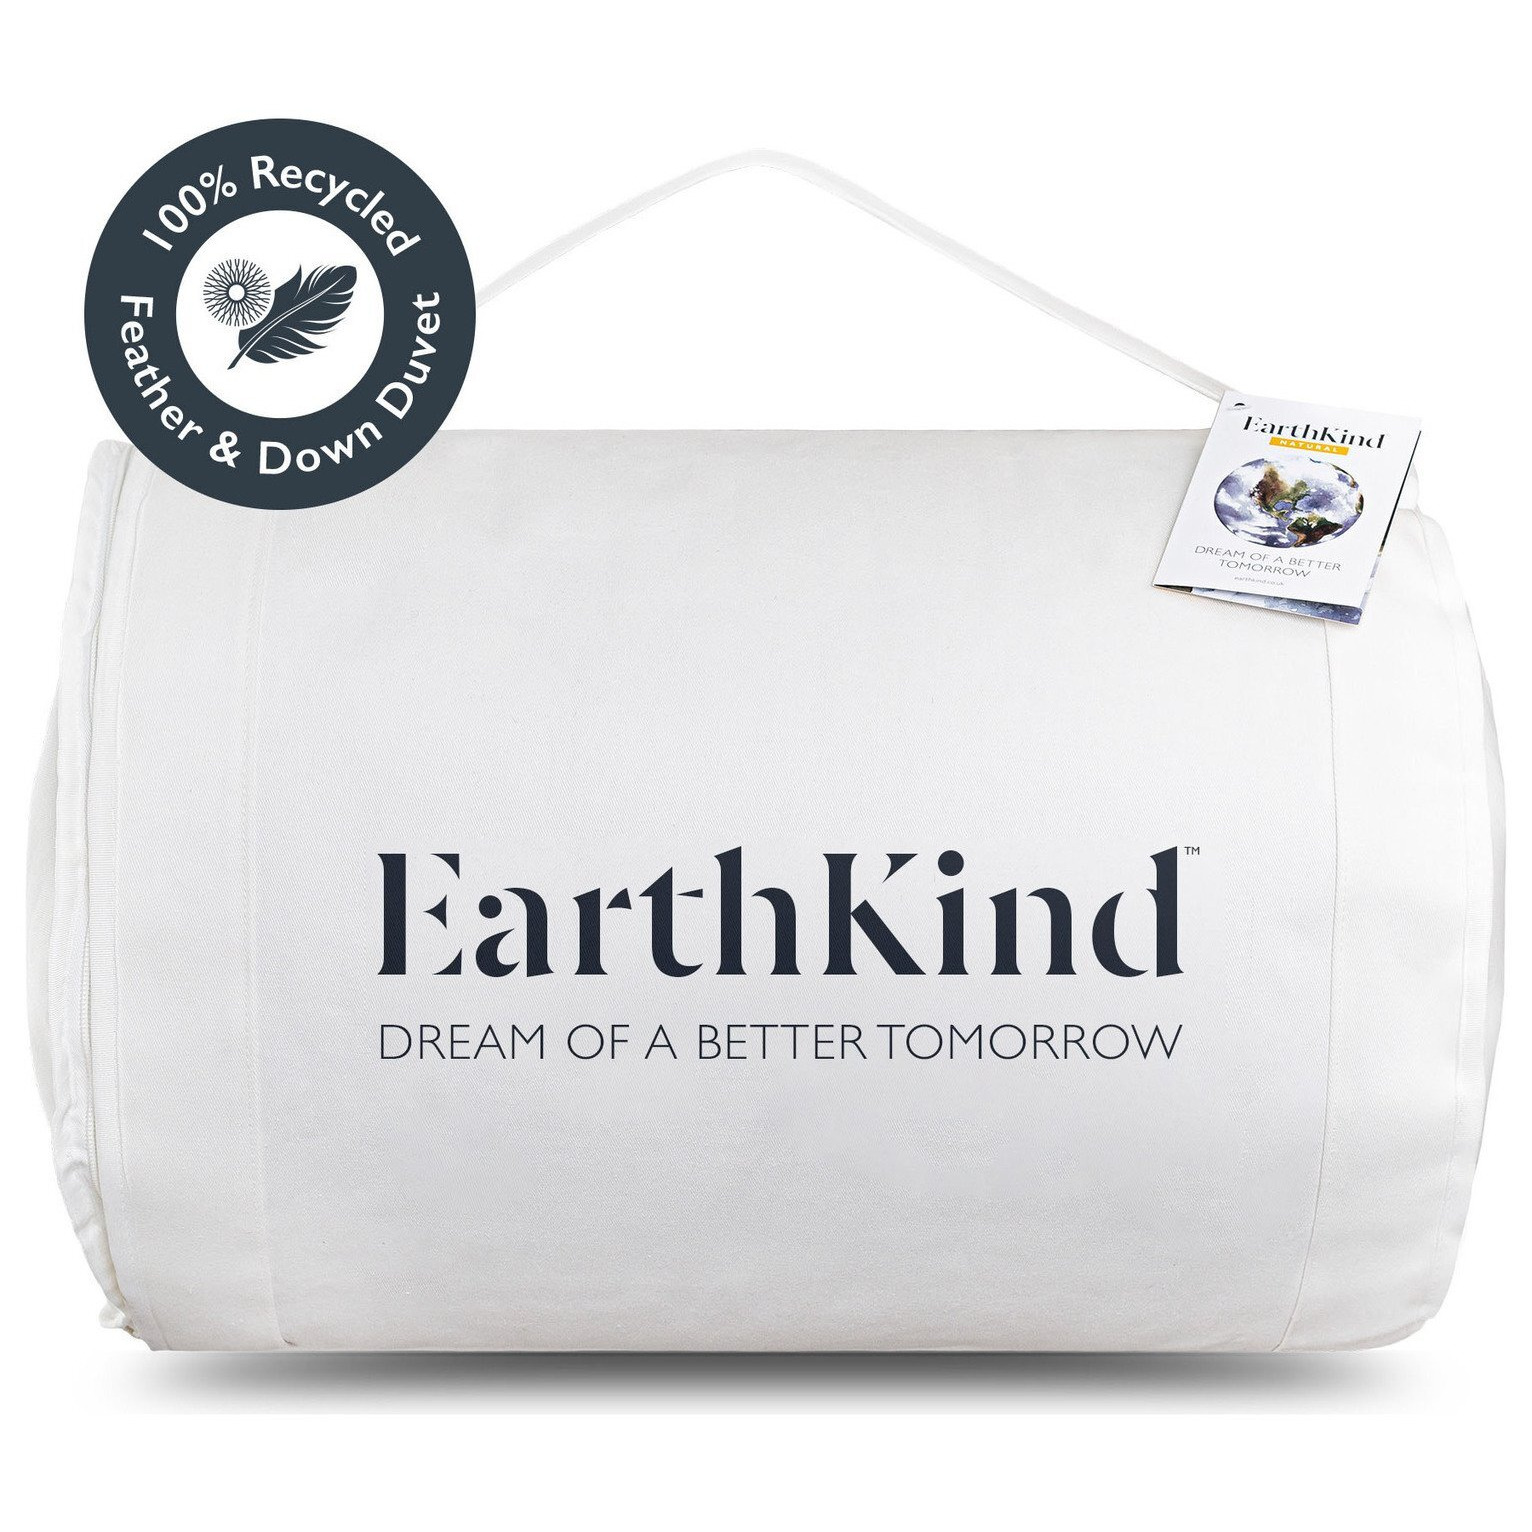 Earthkind Luxury Feather & Down 10.5 Tog Duvet - Single - image 1